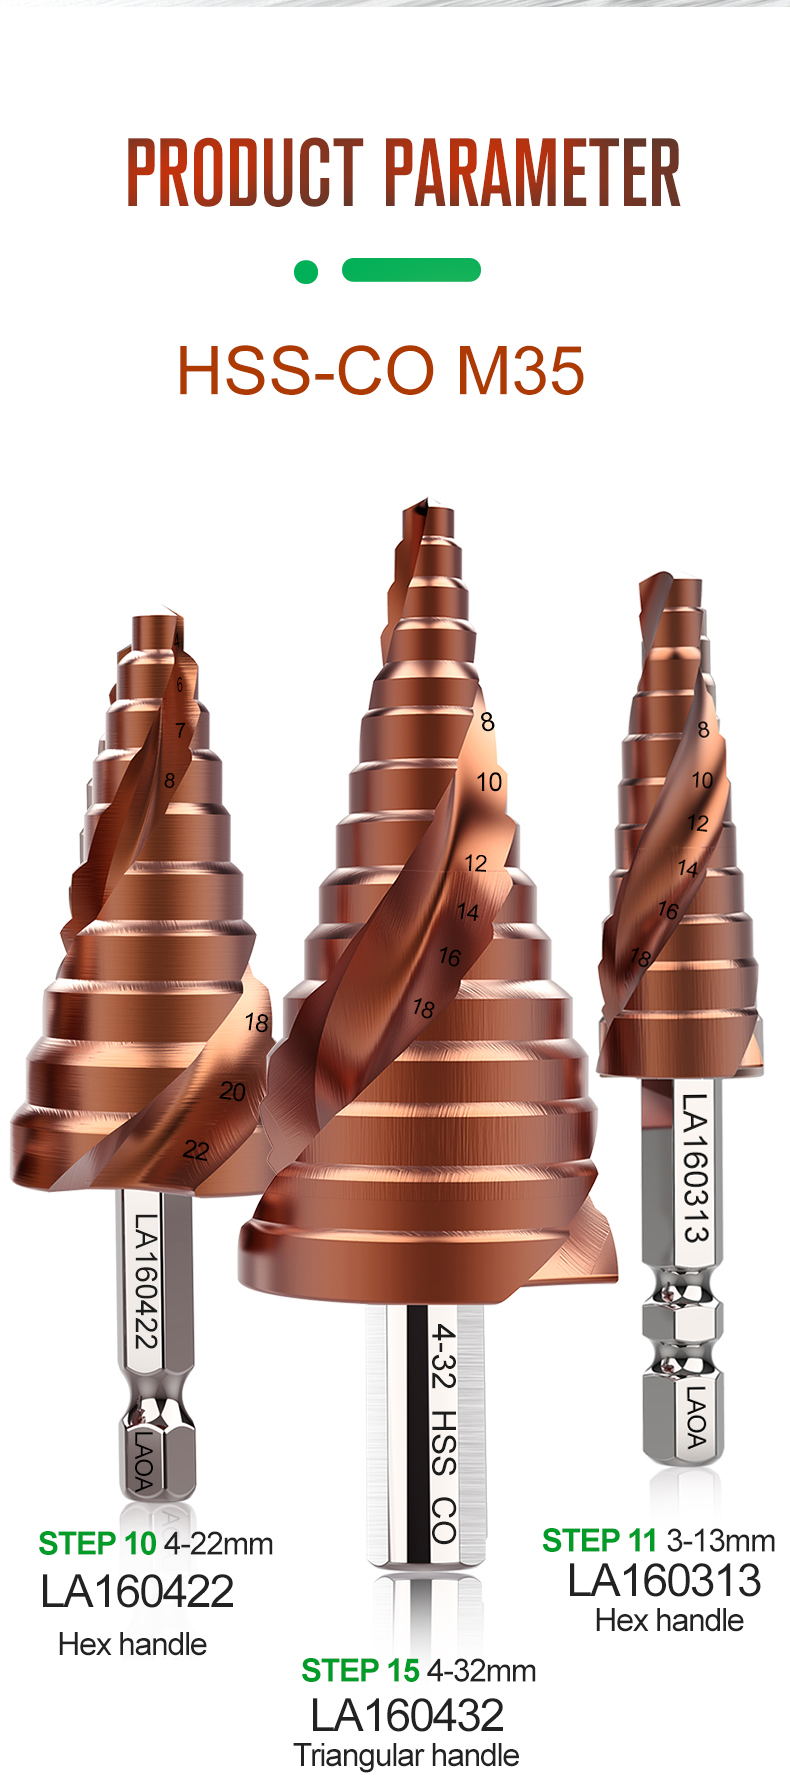 LAOA-3-13mm-4-22mm-4-32mm-Pagoda-Step-Drill-Bit-HSS-CO-M35-Hex-Triangle-Spiral-Grooved-Wood-Metal-Ho-1865380-4